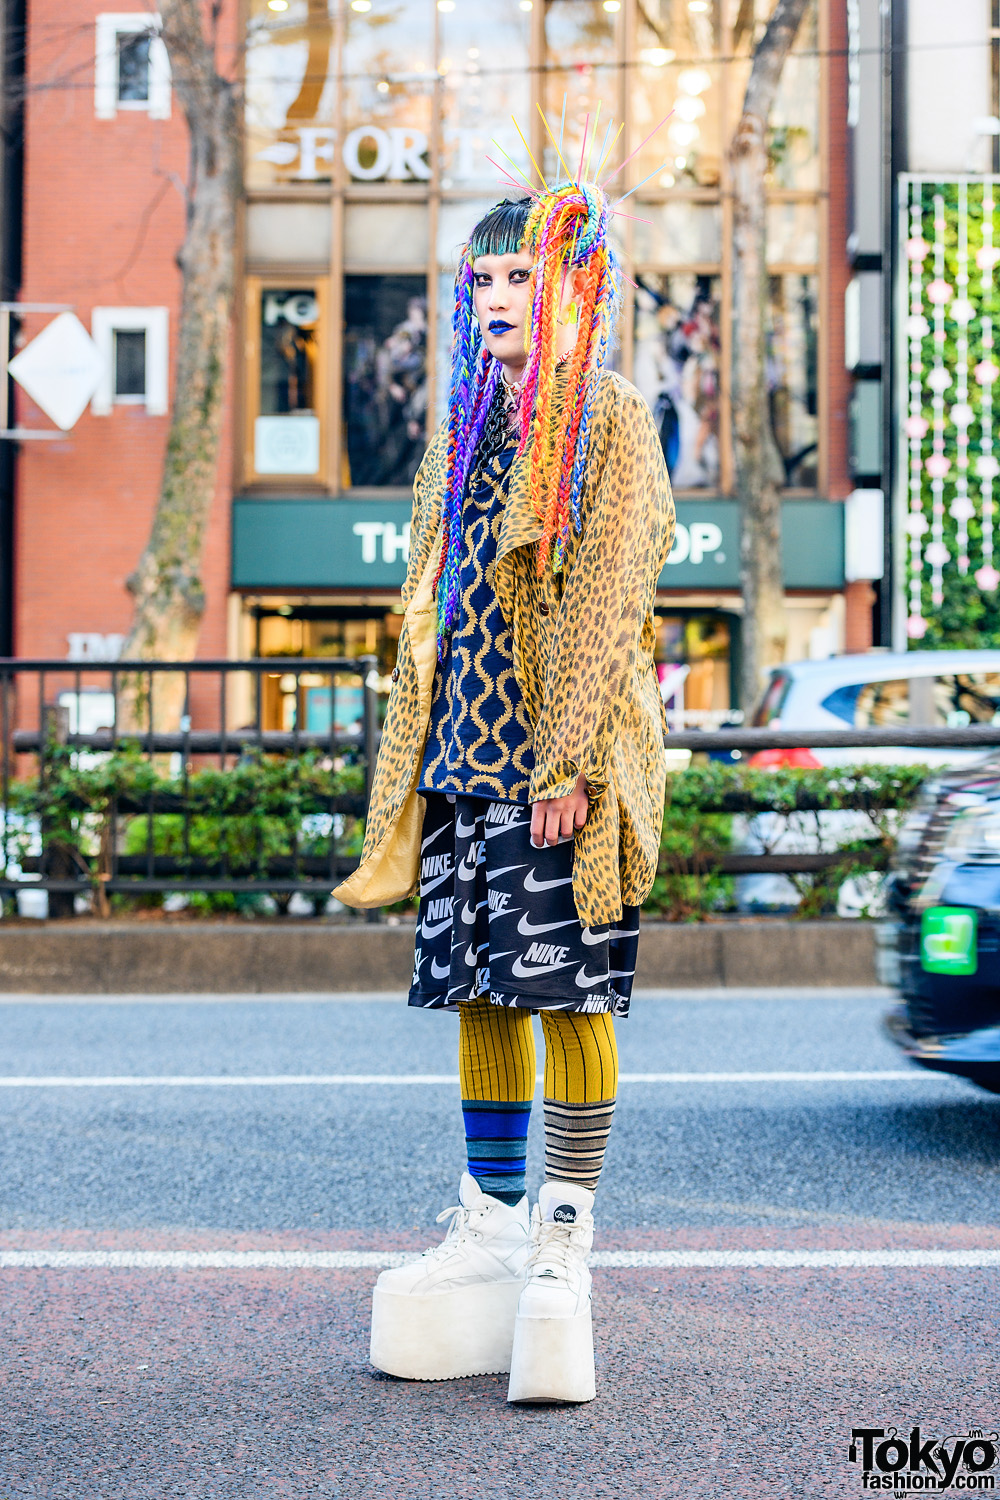 Tokyo Style w/ Braided Rainbow Hair Falls, Vivienne Westwood World's End, Leopard Print, Comme des Garcons x Nike, MM6, Gallerie & Buffalo